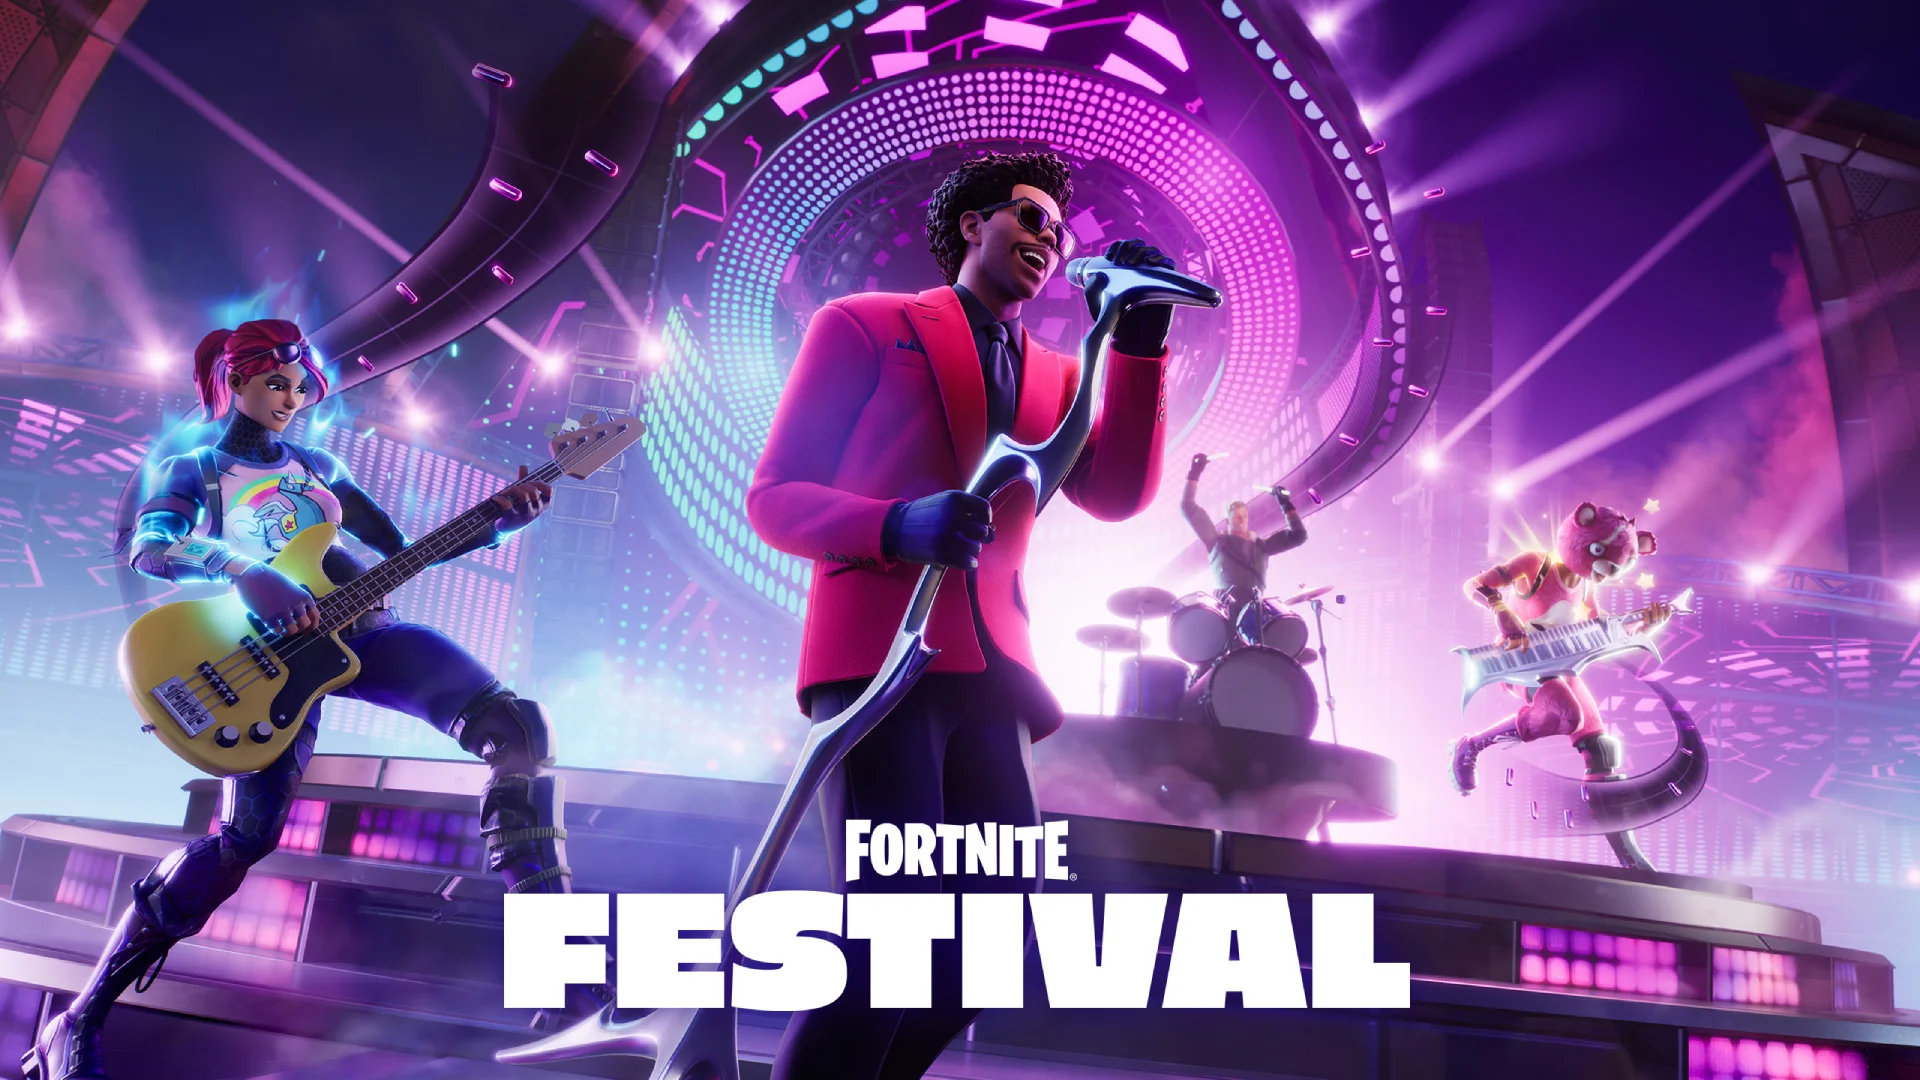 Fortnite Festival to Get Hundreds of Free Songs Per Year and Legacy